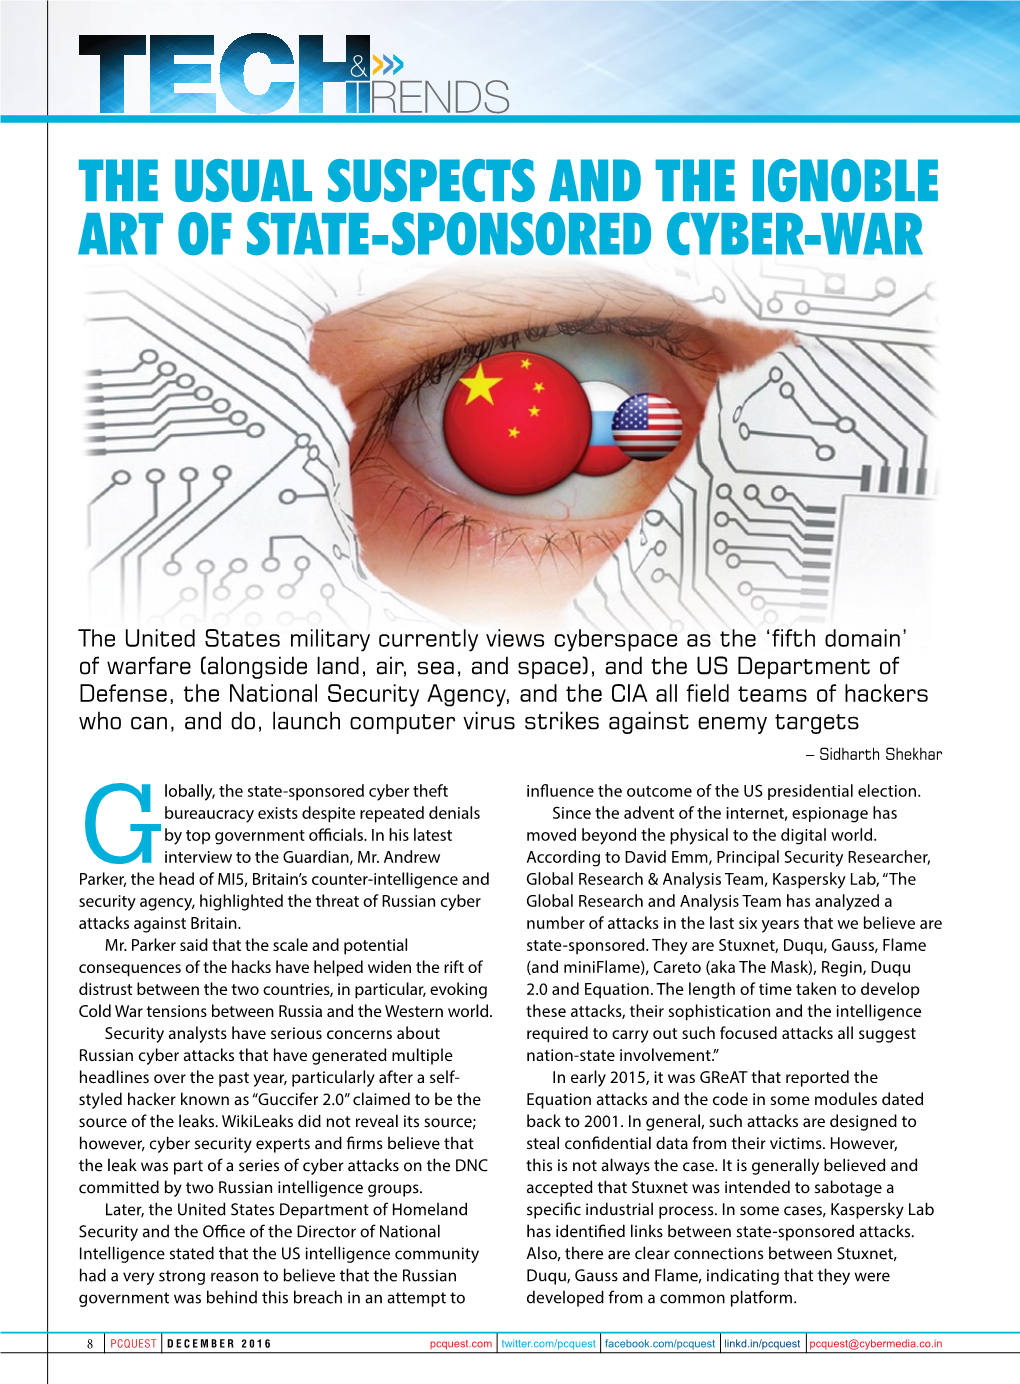 The Usual Suspects and the Ignoble Art of State-Sponsored Cyber-War